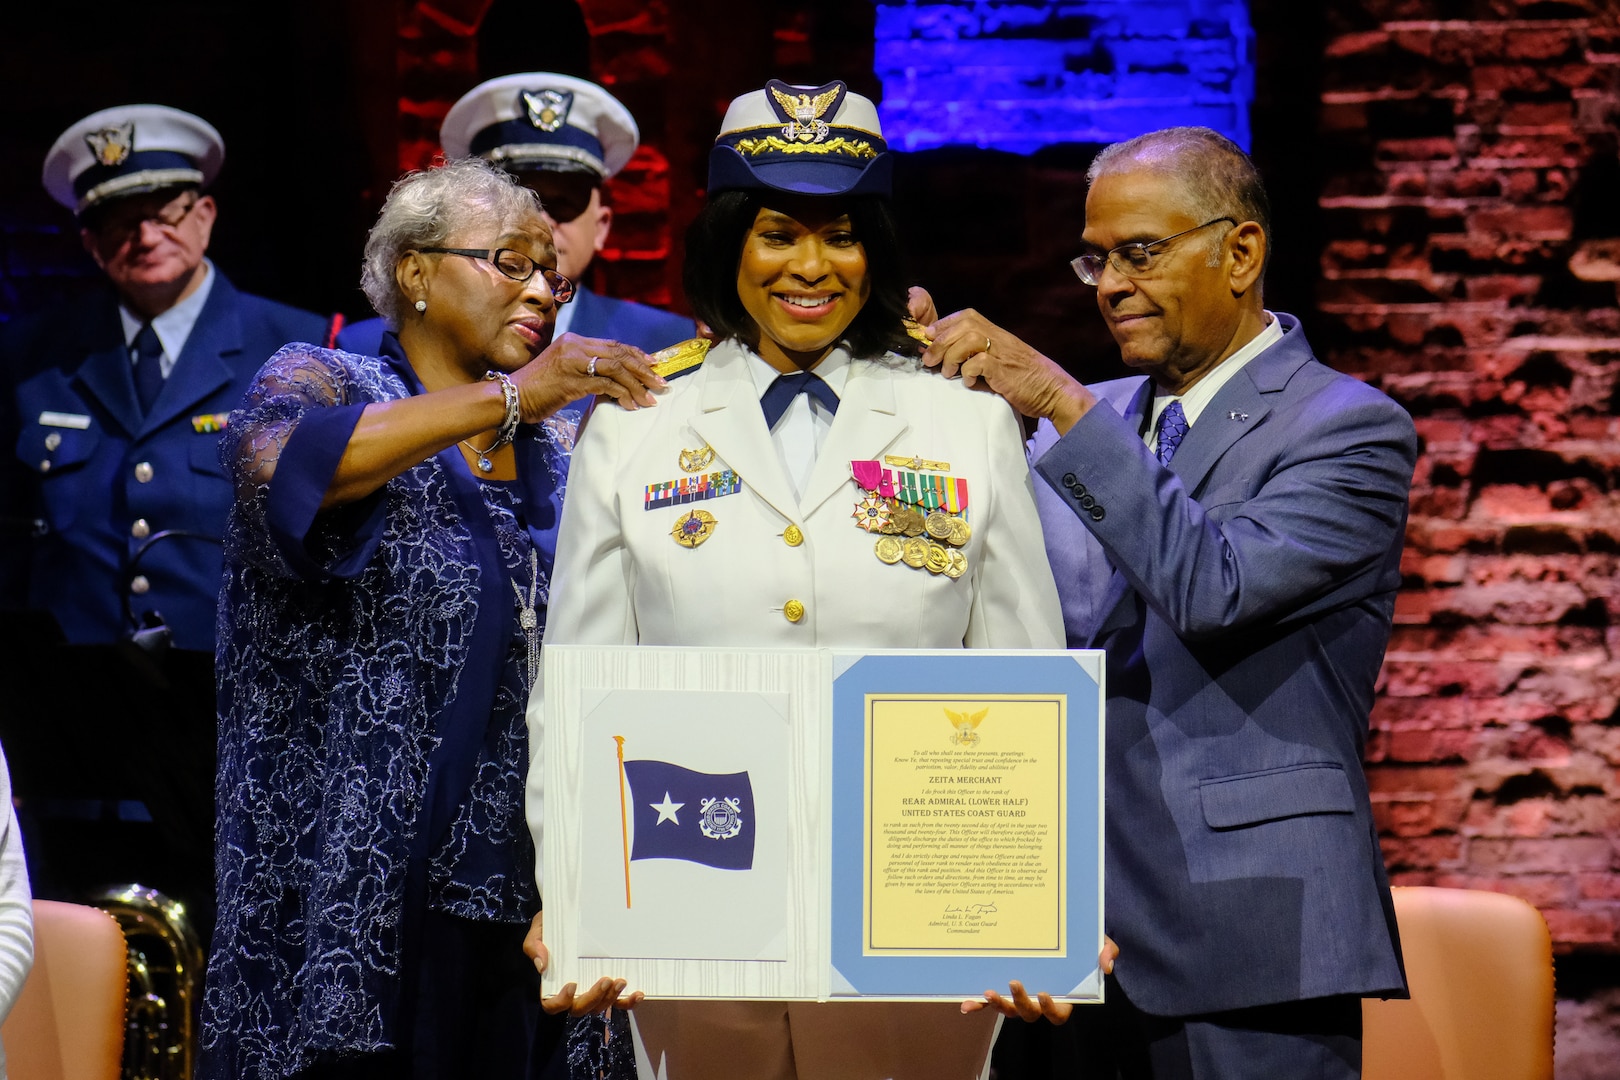 Capt. Zeita Merchant, the outgoing Coast Guard Sector New York commander is shown being frocked to rear admiral lower half, during a ceremony at the Richard Rodgers Theatre in Manhattan, New York, April 22, 2024. Merchant is the first the first African-American woman to achieve this rank in the nearly 234-year history of the military service. (U.S. Coast Guard photo by Petty Officer 2nd Class Ryan Schultz)